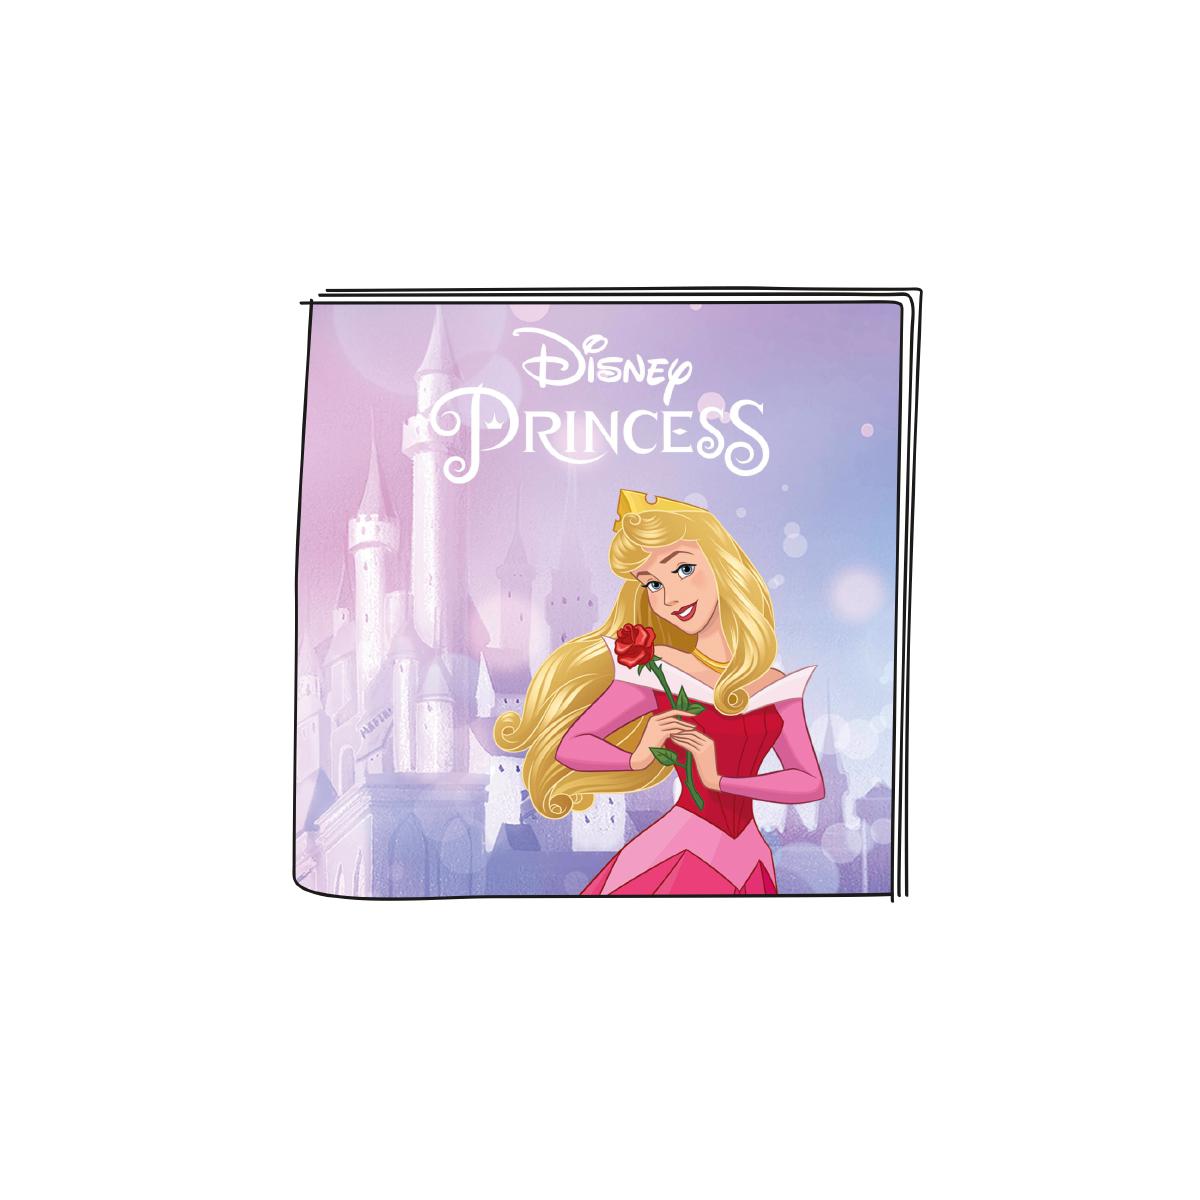 Tonies Disney Sleeping Beauty - Audio Character for use with Toniebox Player